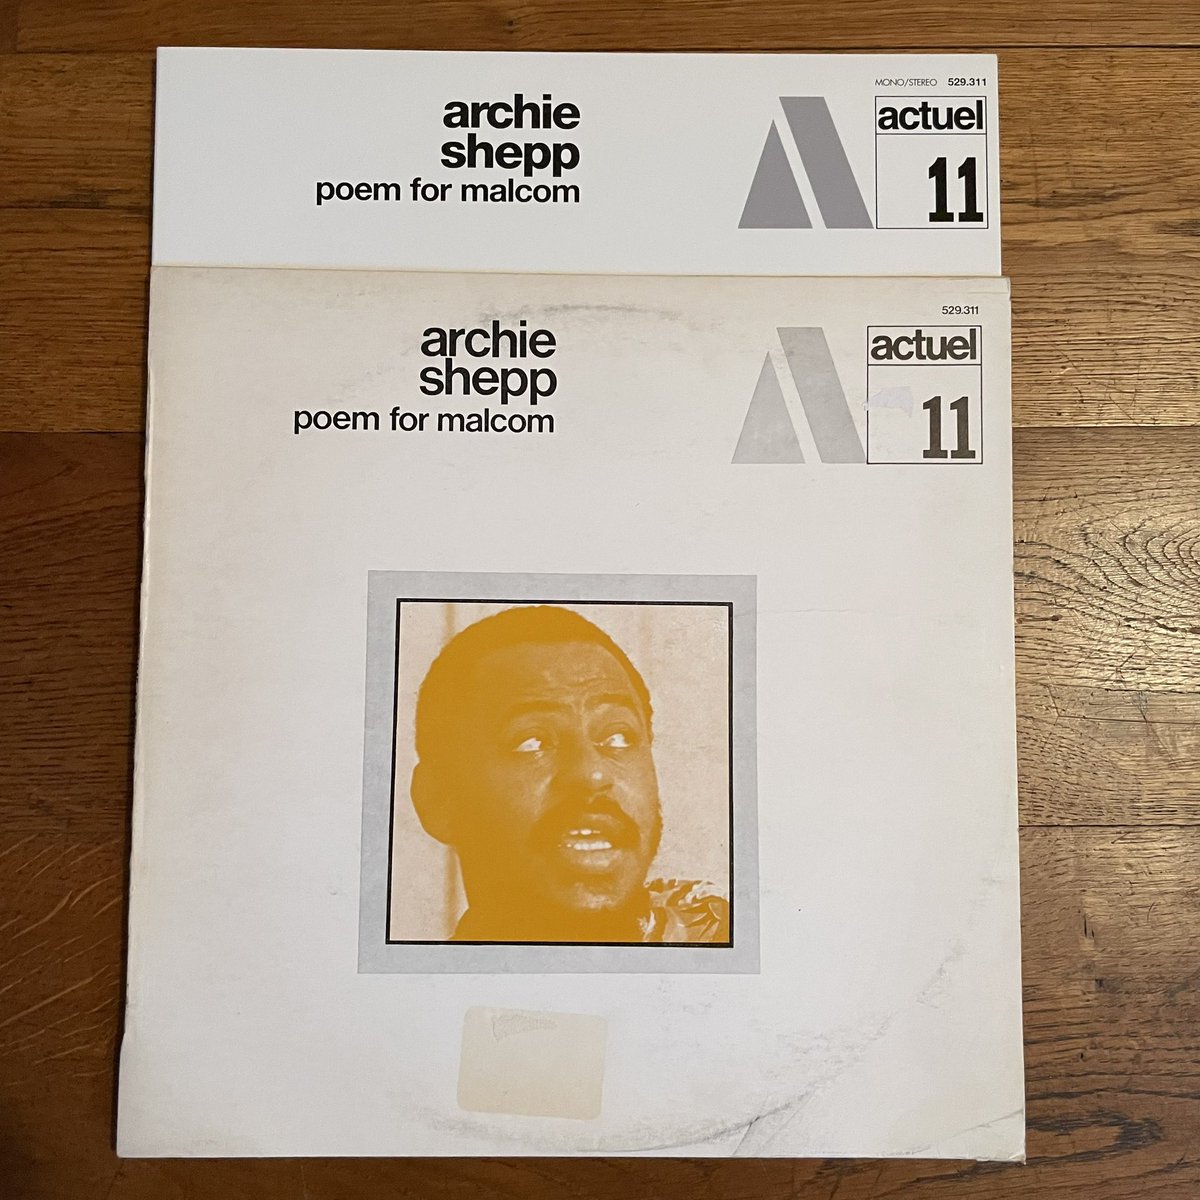 #NowPlaying Archie Shepp - Poem For Malcolm (BYG Records, 1969). Funny, I hadn't realized until today that this record had a typo in the album title on the cover (and the labels), mentioning 'poem for malcom' instead of 'malcolm'.